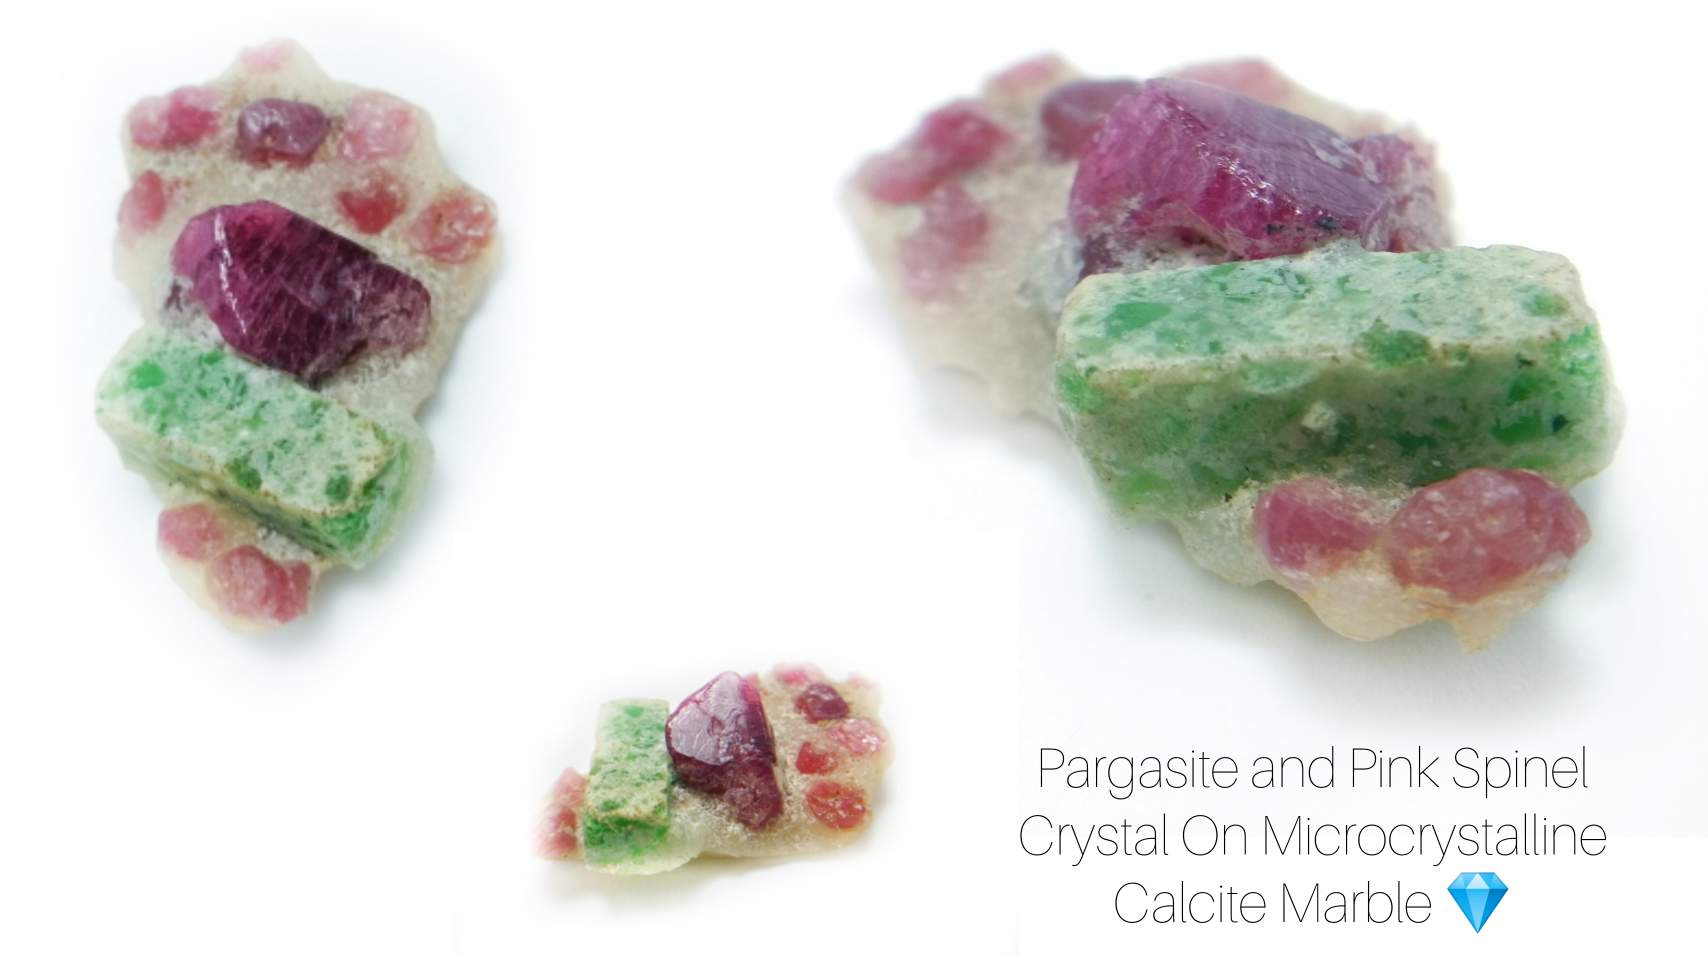 Pargasite and Pink Spinel Crystals on Calcite Marble 韭角閃石 、粉紅尖晶石、方解石大理石上共生 Spinel is the magnesium aluminium member of the larger spinel group of minerals with chemical formula MgAl₂O₄ This oxide mineral is Cubic crystal system with 7.5–8.0 hardness according to Mohs hardness scale. Spinels Specific Gravity is depending on the composition of chemicals such as Zn-rich spinel can be as high as 4.40, otherwise it averages from 3.58 to 3.61. Spinel has many colours such as red, pink, blue, lavender/violet, dark green, brown, black, colourless, gray. Some red and pink spinels have fluorescence under UV Light. also, Some spinels have magnetism Weak to medium. Spinels are found in Madagascar, Sri Lanka, Vietnam, Myanmar, Tanzania, Kenya, Nigeria. Pargasite is a complex inosilicate mineral of the amphibole group with formula NaCa₂O₂₂(OH)₂. This inosilicates mineral has 5 - 6 hardness according to the Mohs Hardness scale with 3.04–3.17 Specific Gravity. This bi axial mineral has colours such as Bluish green, grayish black, light brown, Green. It was first described for an occurrence in Pargas, Finland in 1814 and named for the locality. Pargasites are found in Pinland, Vietnam, Madagascar, Tanzania, India, Pakistan, Afghanistan, Mozambique, Hungary, Japan, Bulgaria, Cameroon. Descriptions Weight : 58.90 Cts Locality : Vietnam 🇻🇳